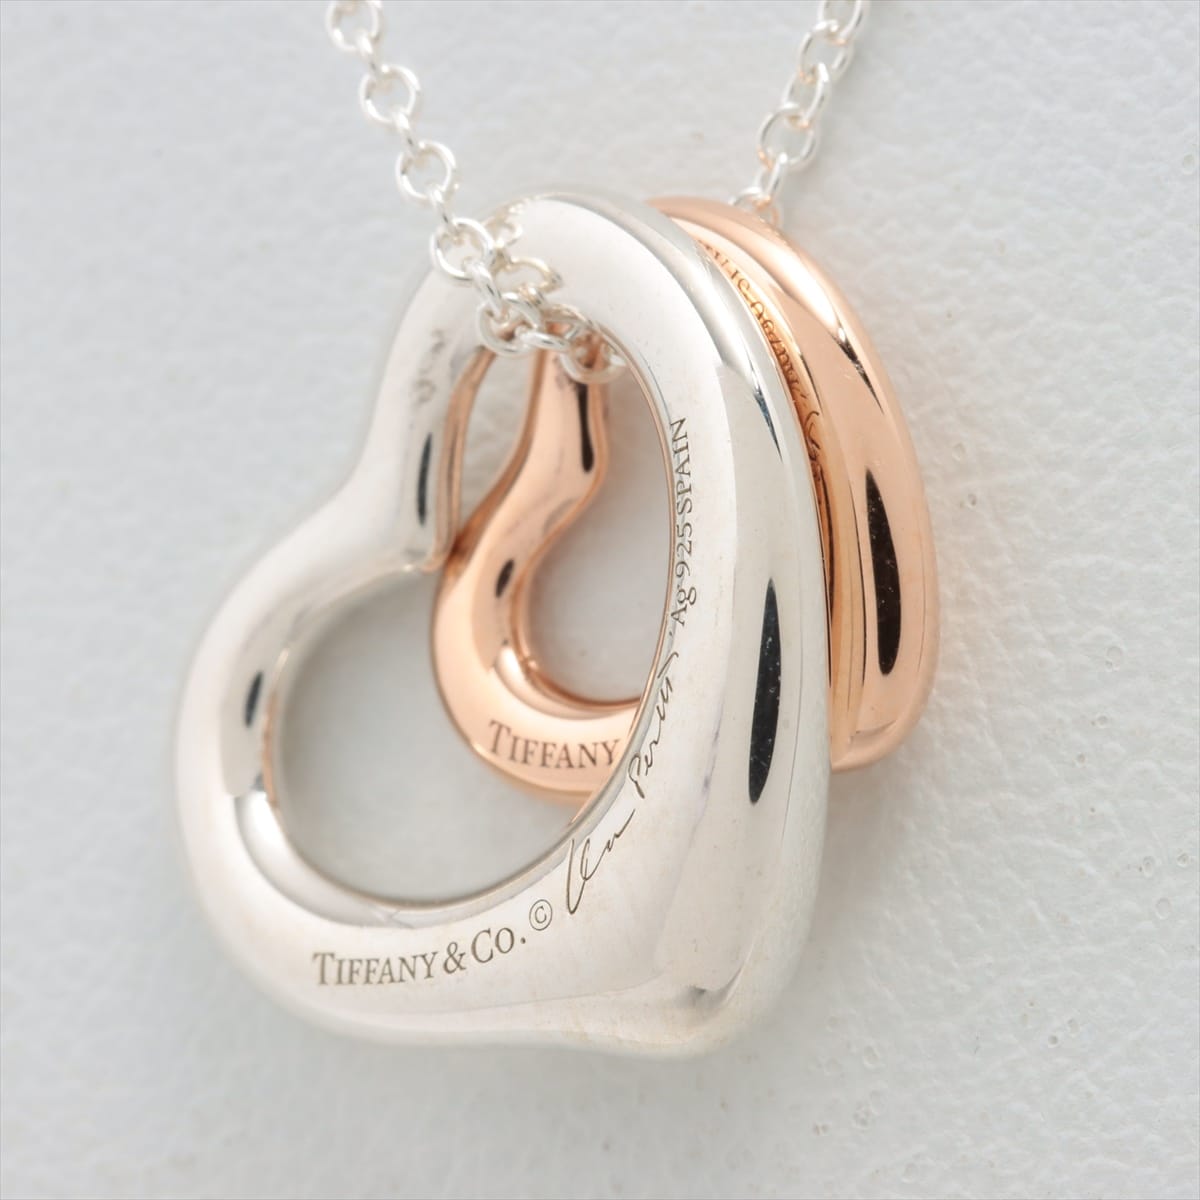 Tiffany Double Open Heart Necklace 925×750 4.4g Gold × Silver